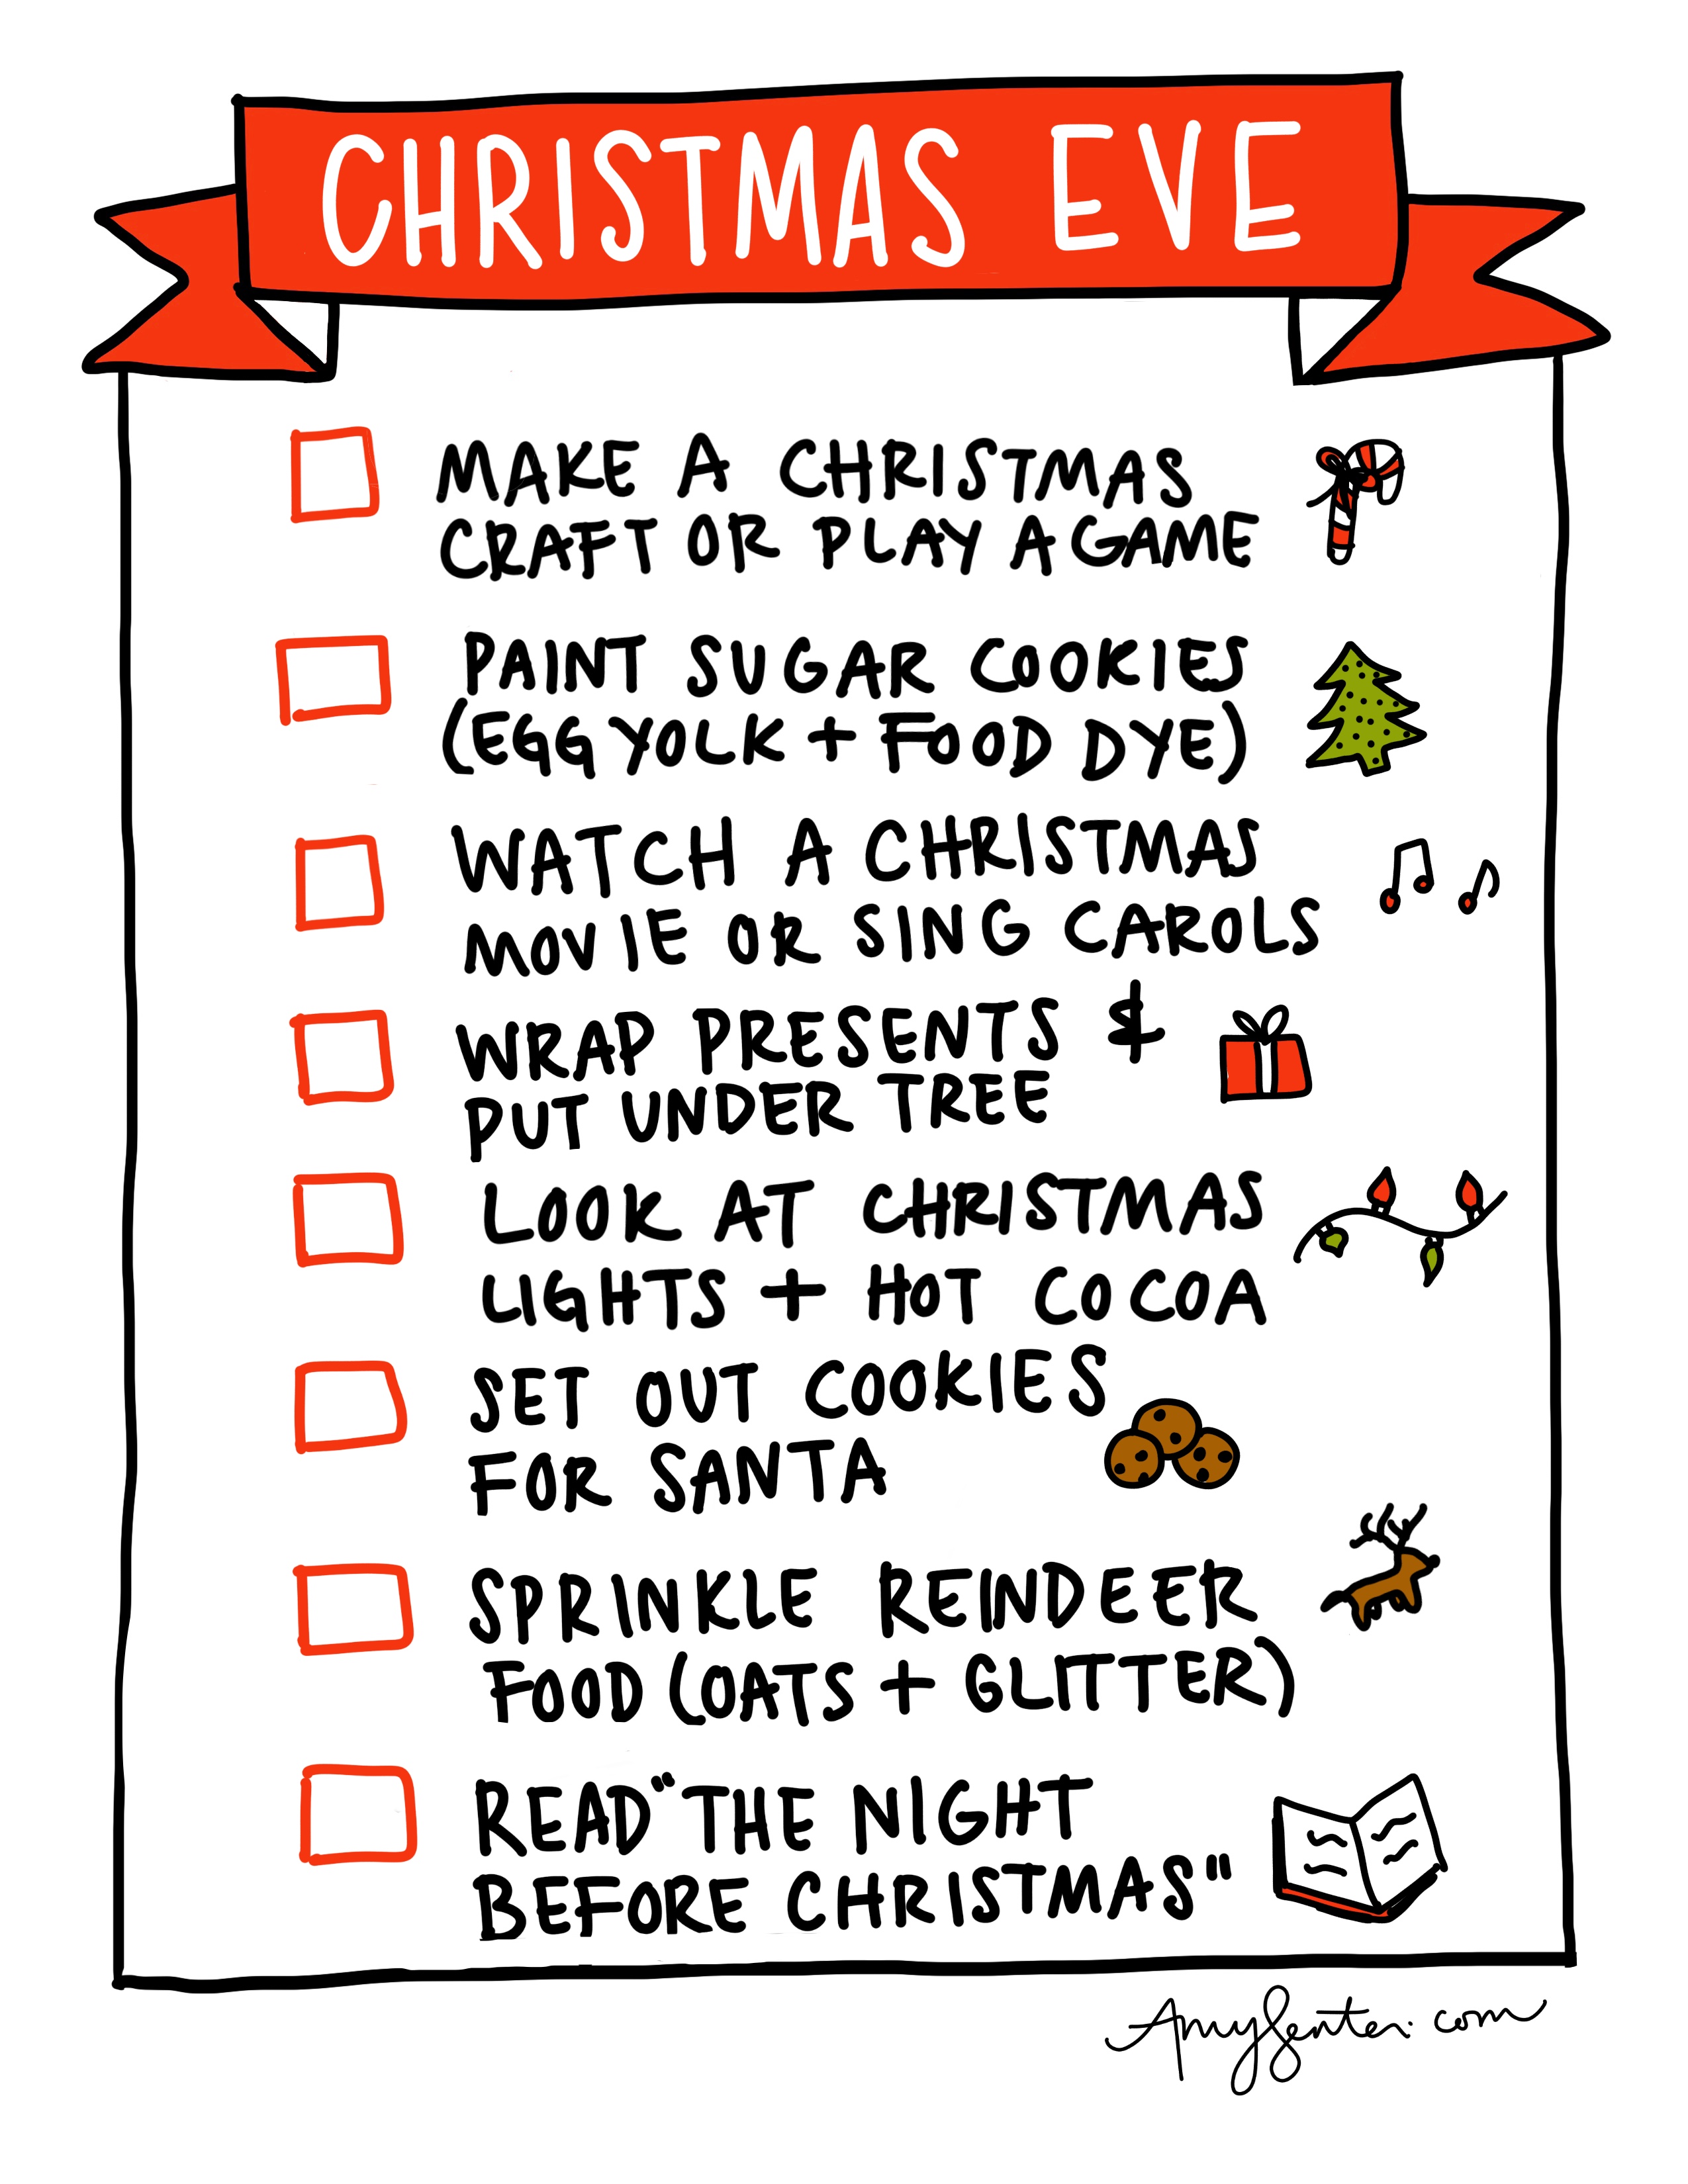 print-this-christmas-eve-itinerary-to-make-your-staycation-special